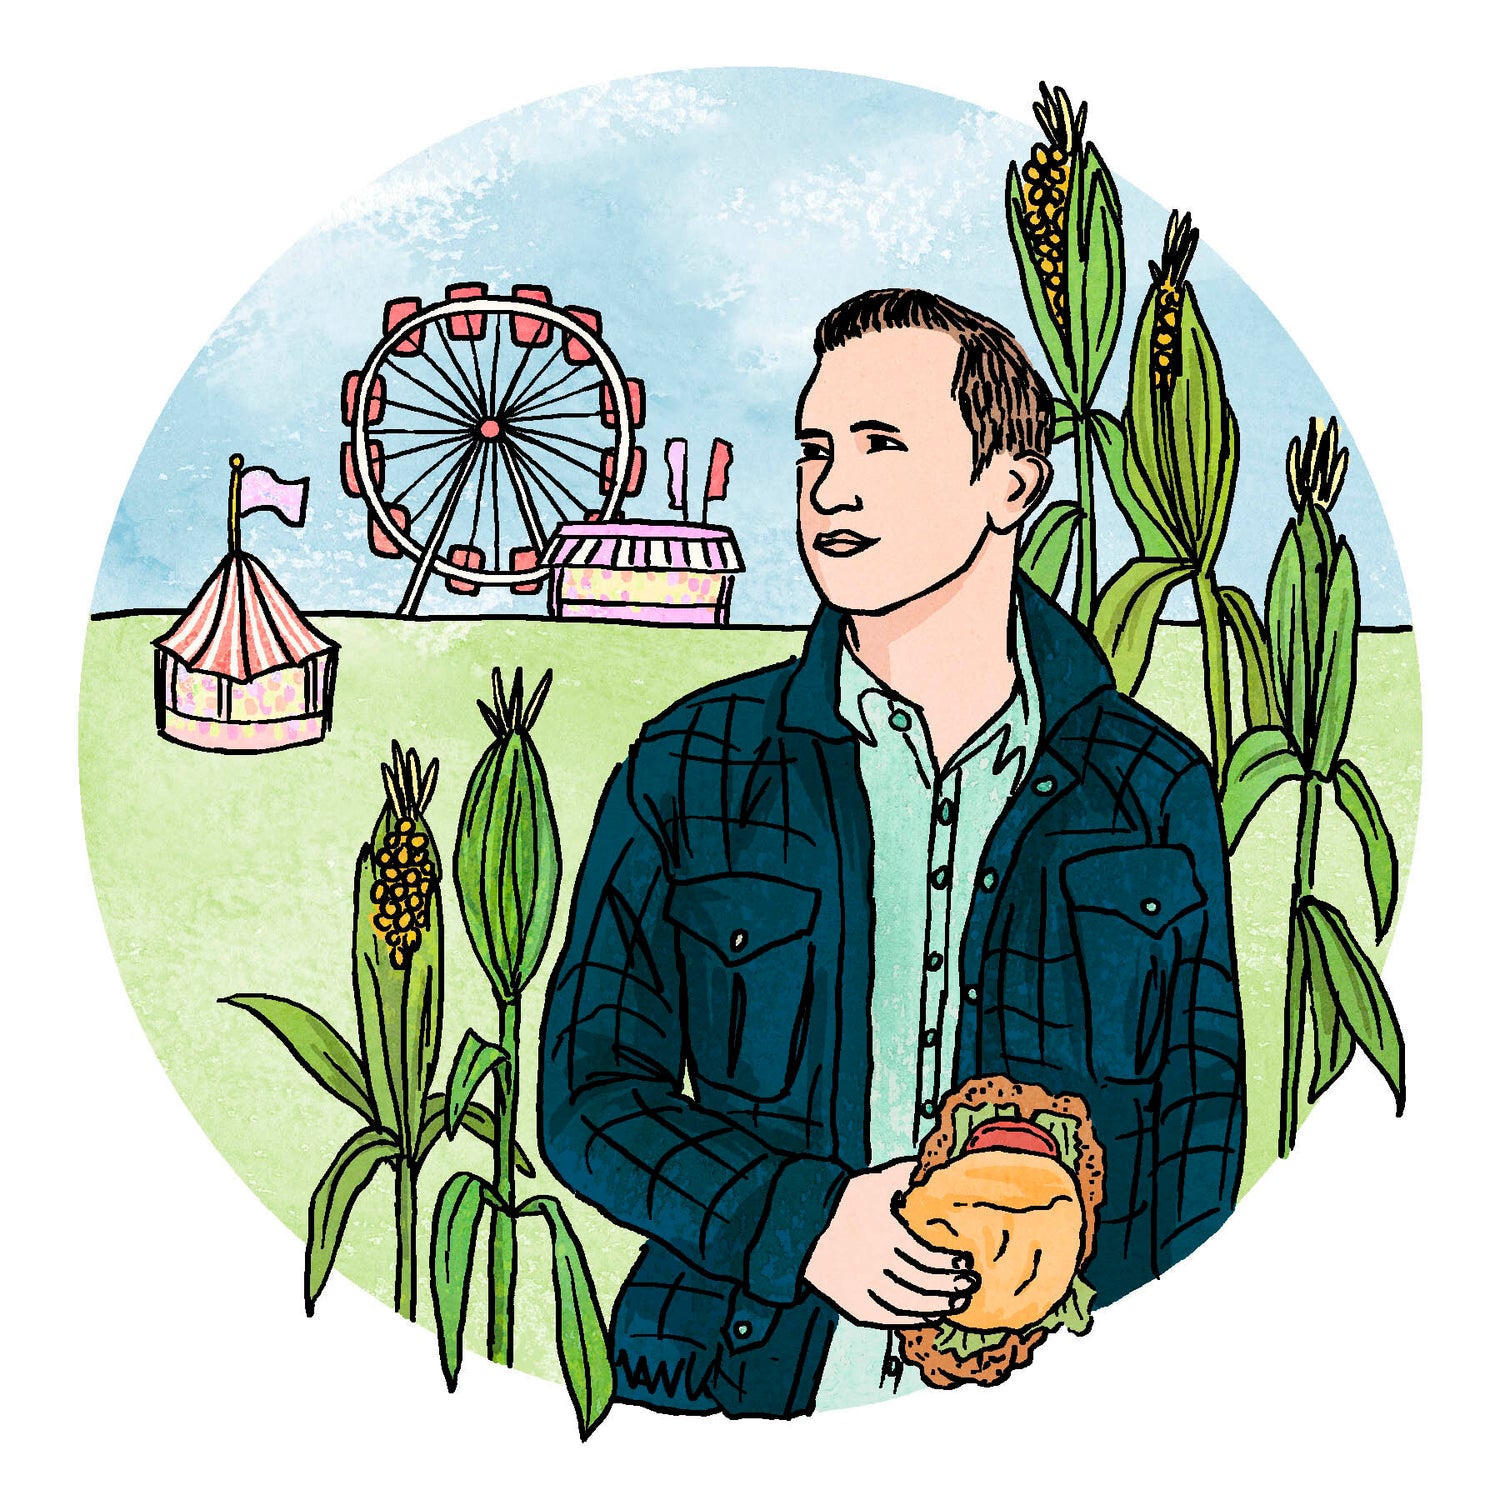 Circular illustrated portrait of writer Adam Wren holding a pork sandwich surrounded by corn stalks in the foreground, county fair in background